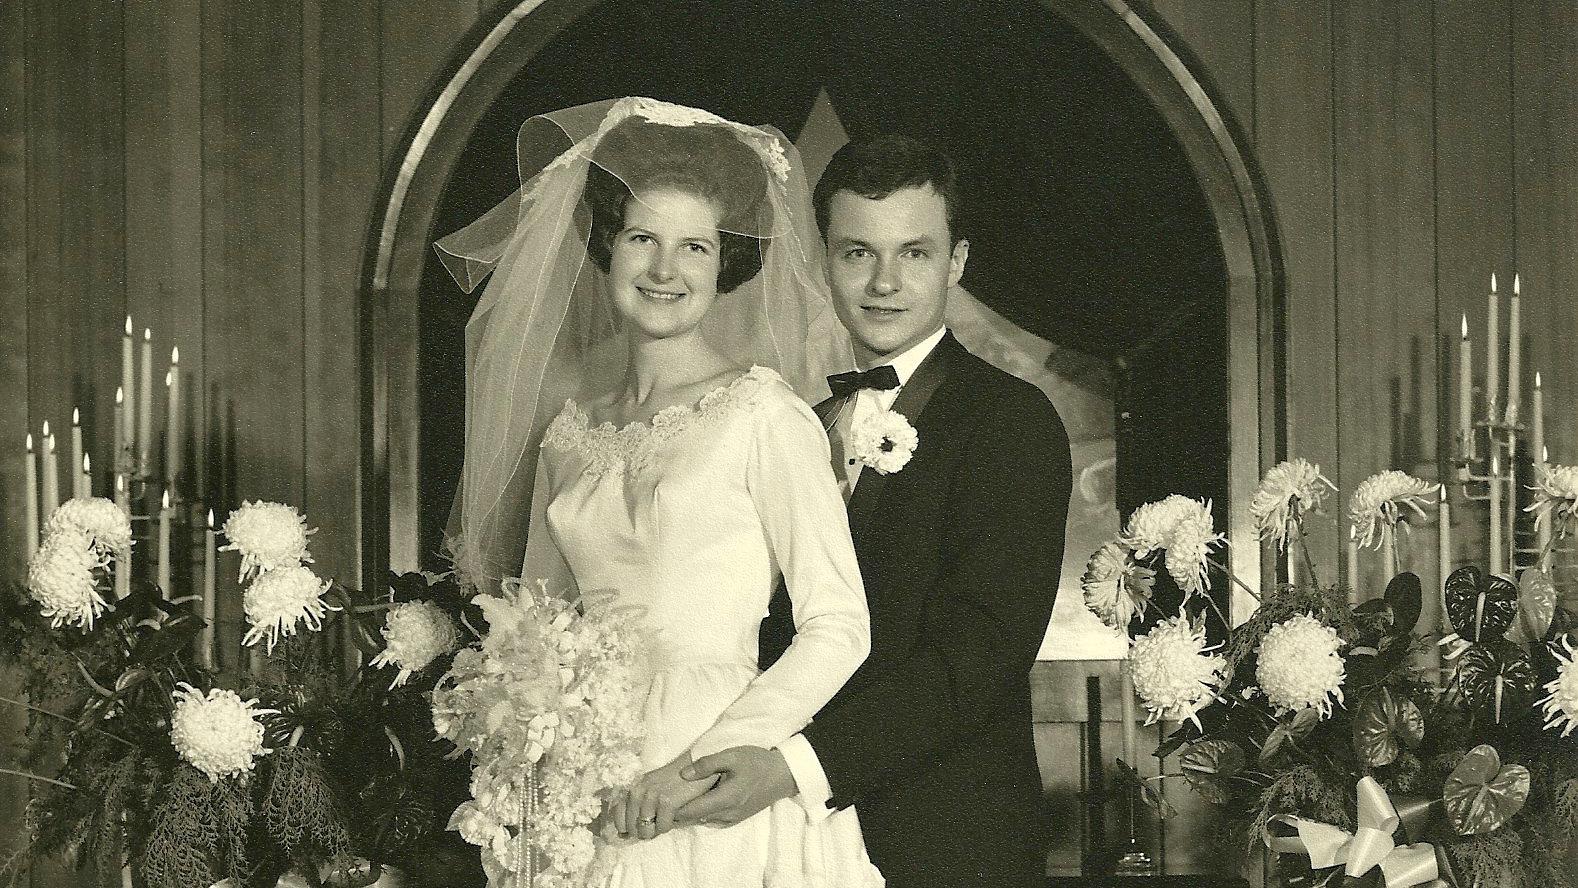 Mary and Royce Thorpe pose at their wedding on December 18th, 1965.